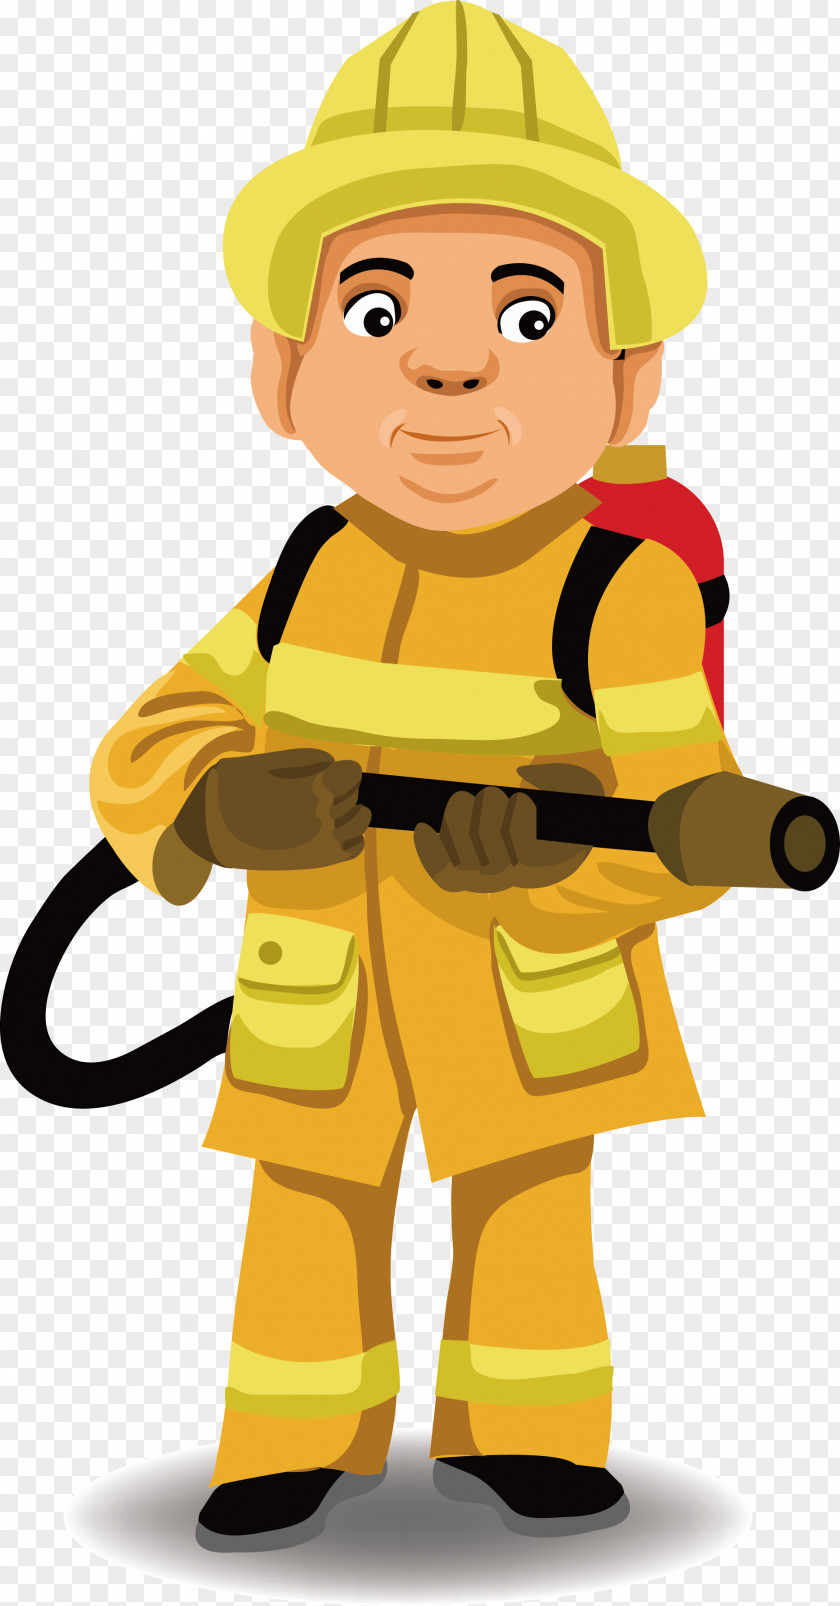 Vector Fire Brigade Police Officer Firefighter Firefighting Illustration PNG